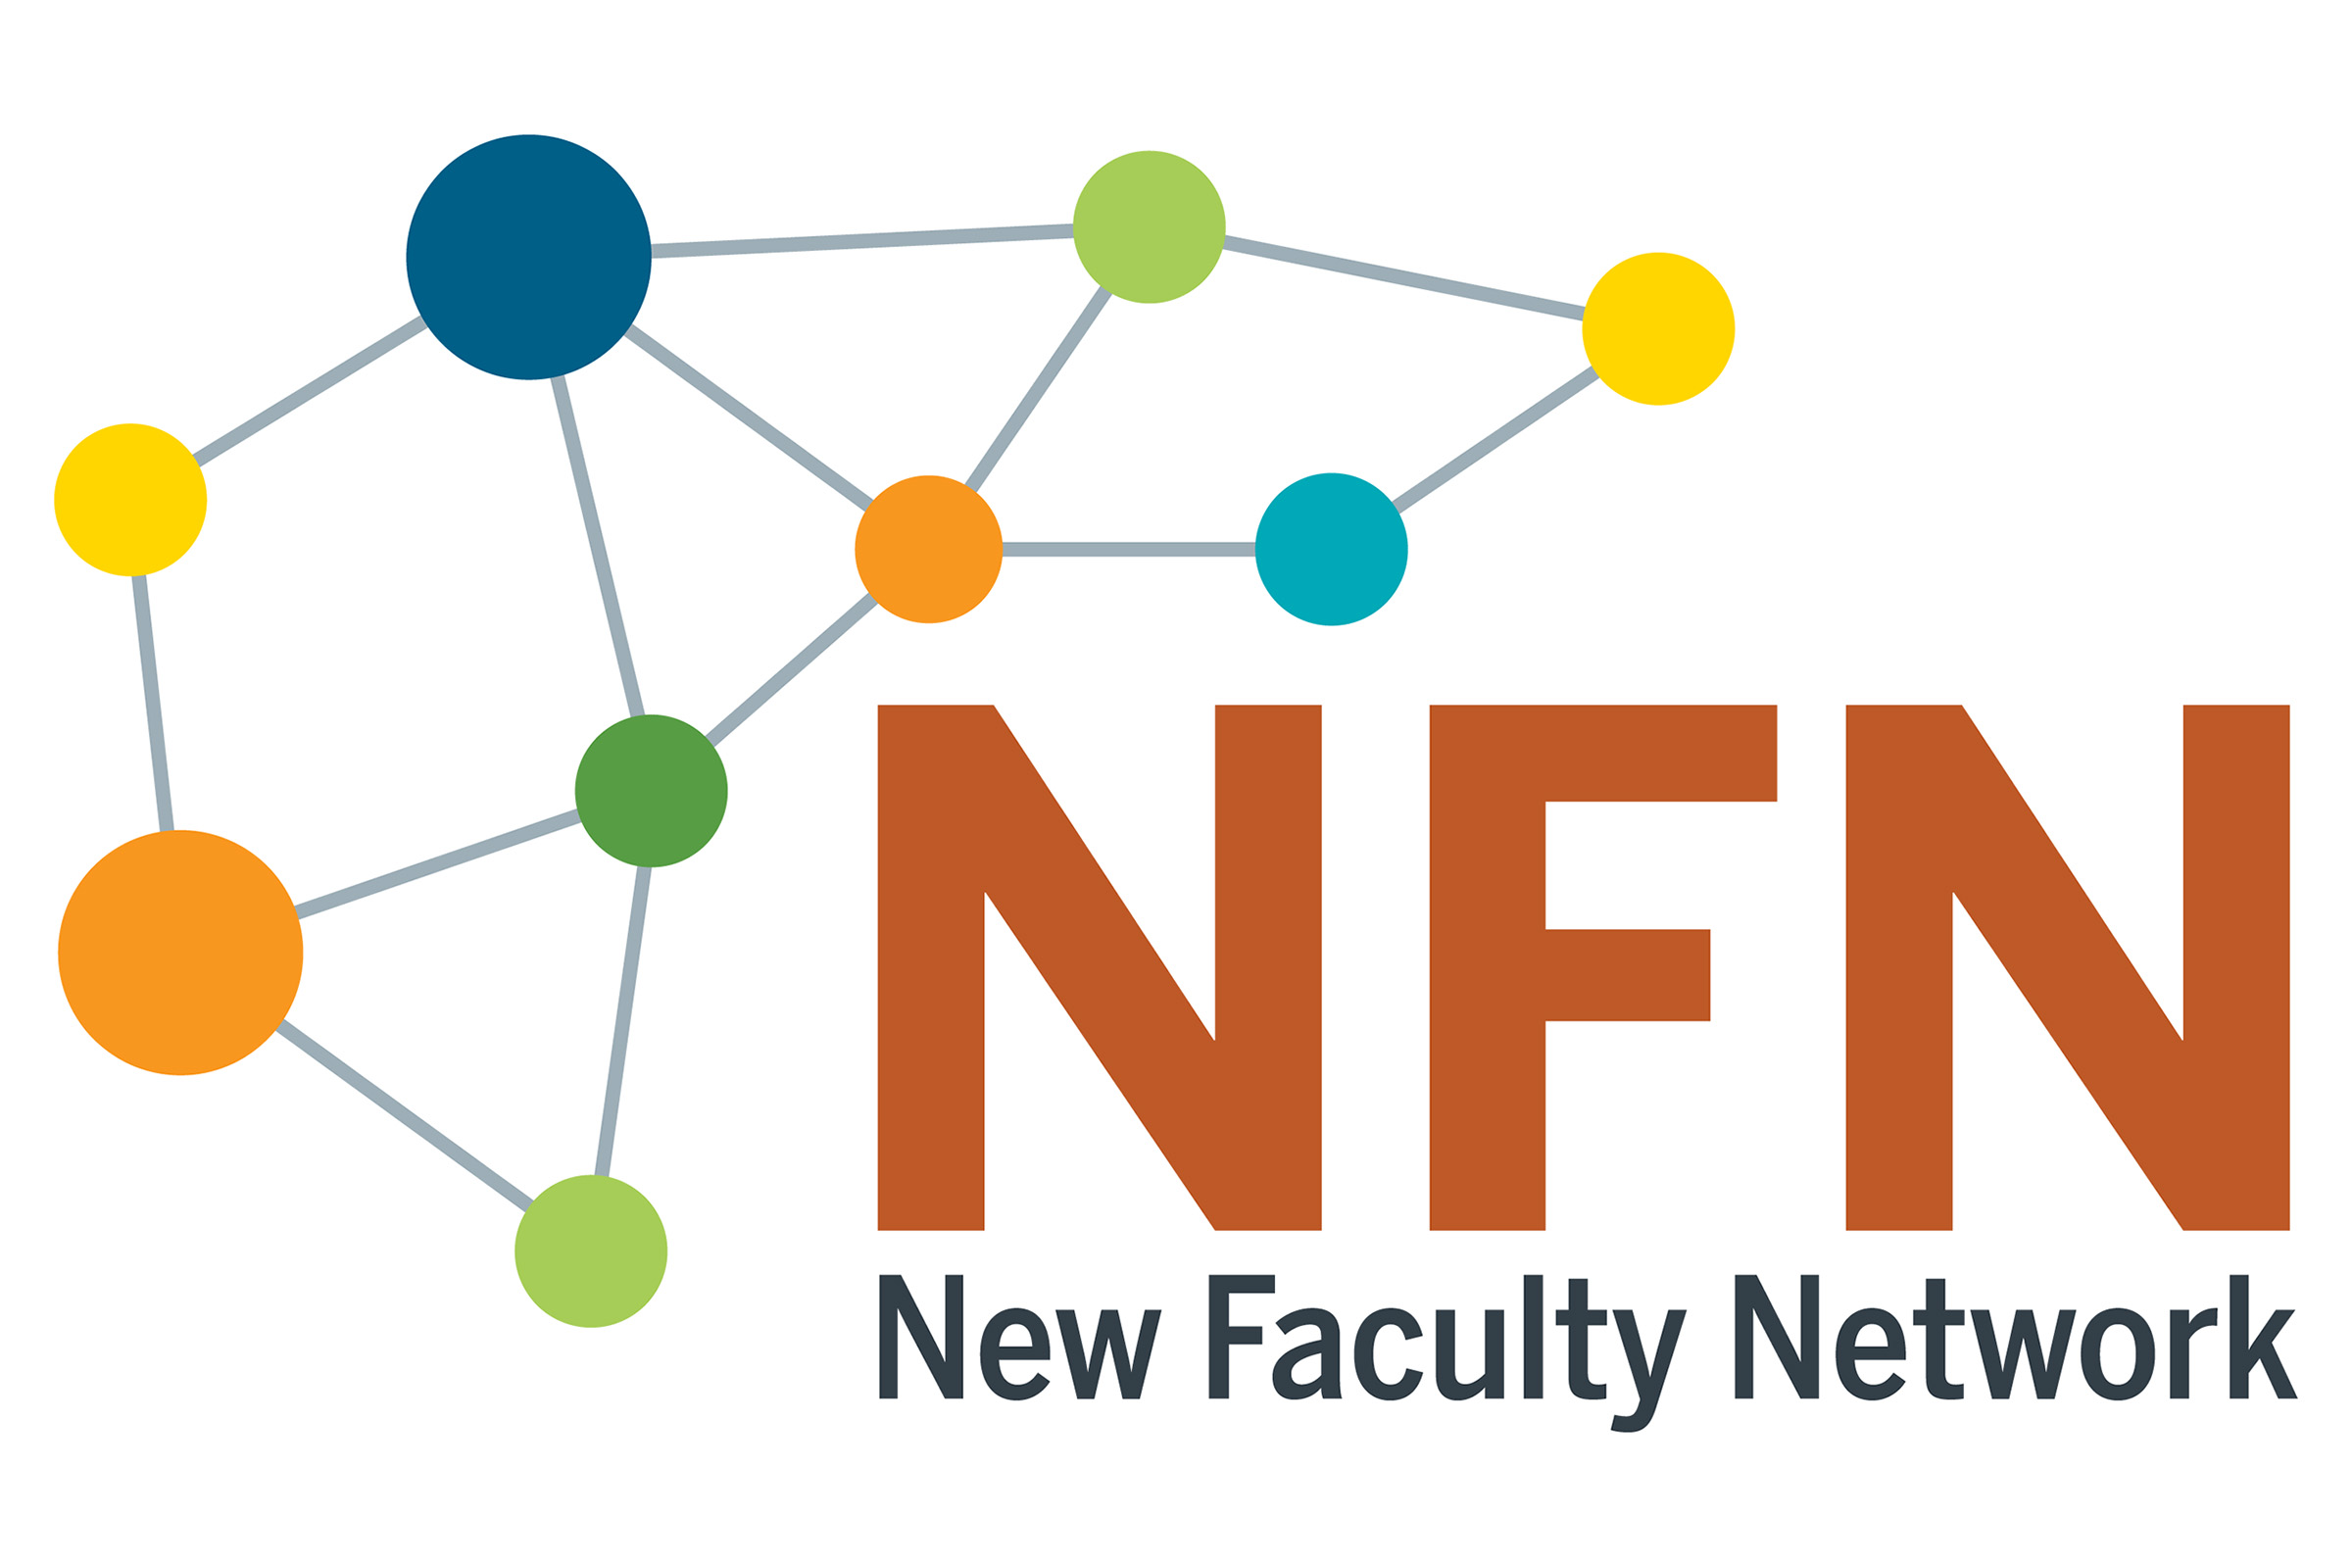 New Faculty Network logo